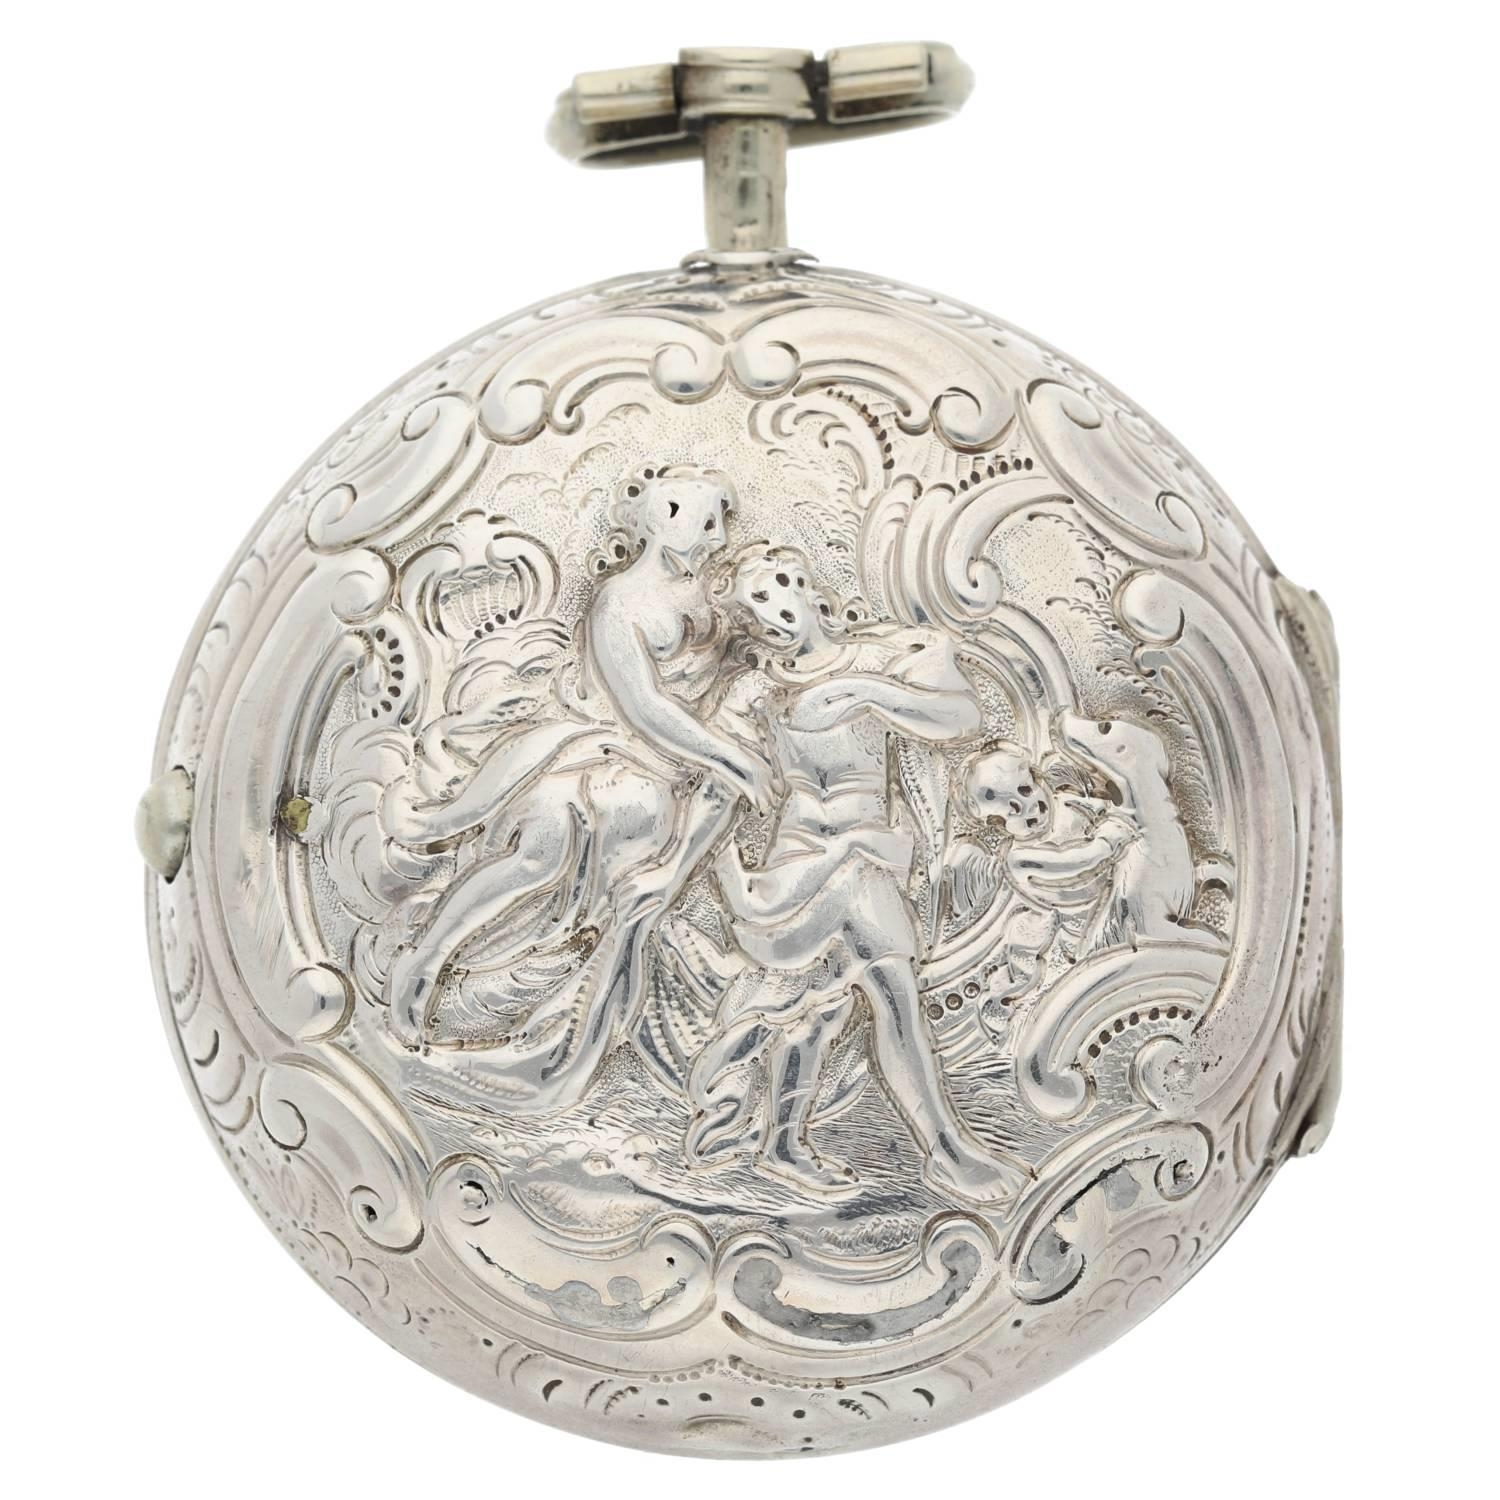 Samson, London - George III English silver repoussé pair cased verge pocket watch, London 1806, - Image 8 of 9